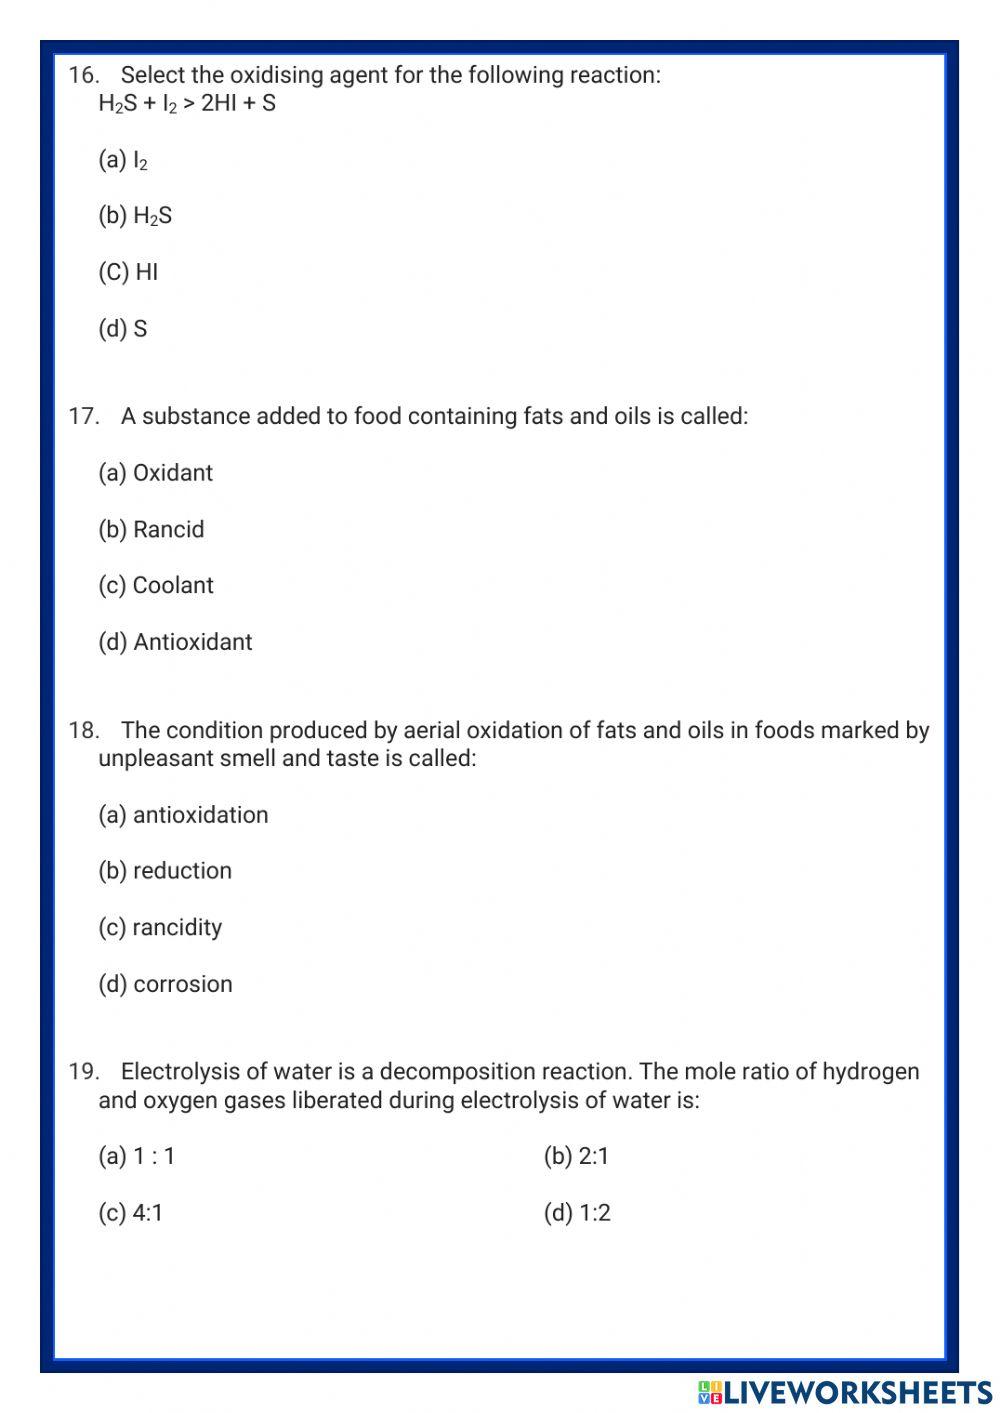 MCQ-Quiz Chapter-Chemical Reactions and Equations